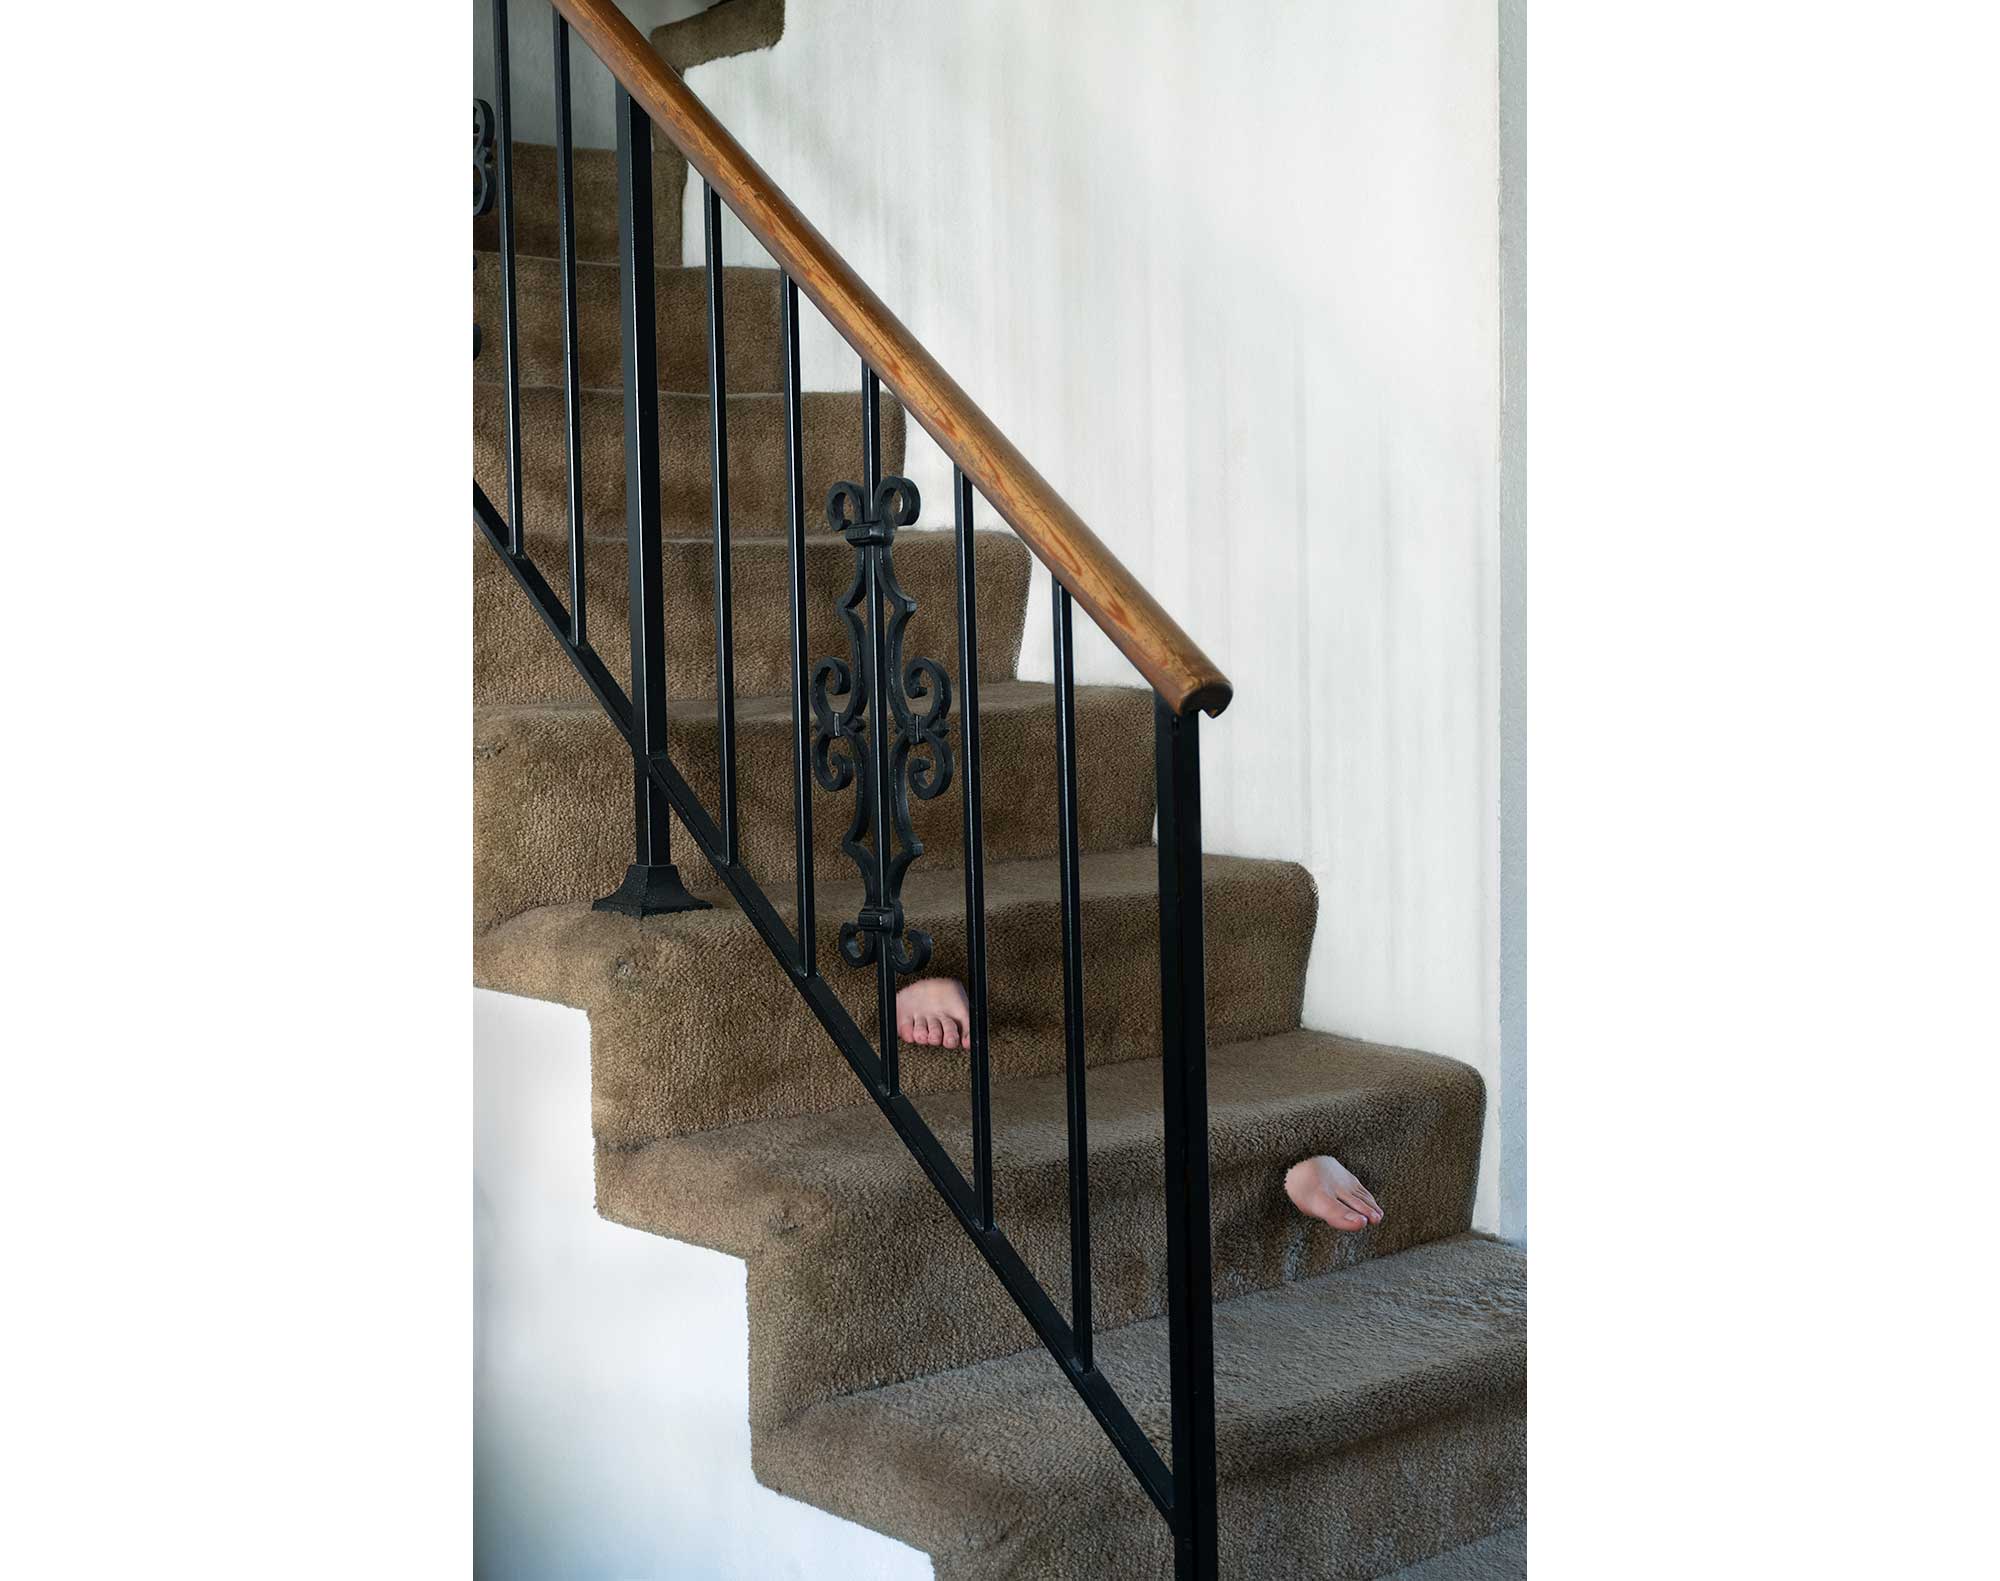 Two feet descend stairs with no body attached. The feet are shown emerging from the carpet on the front of the stair steps.